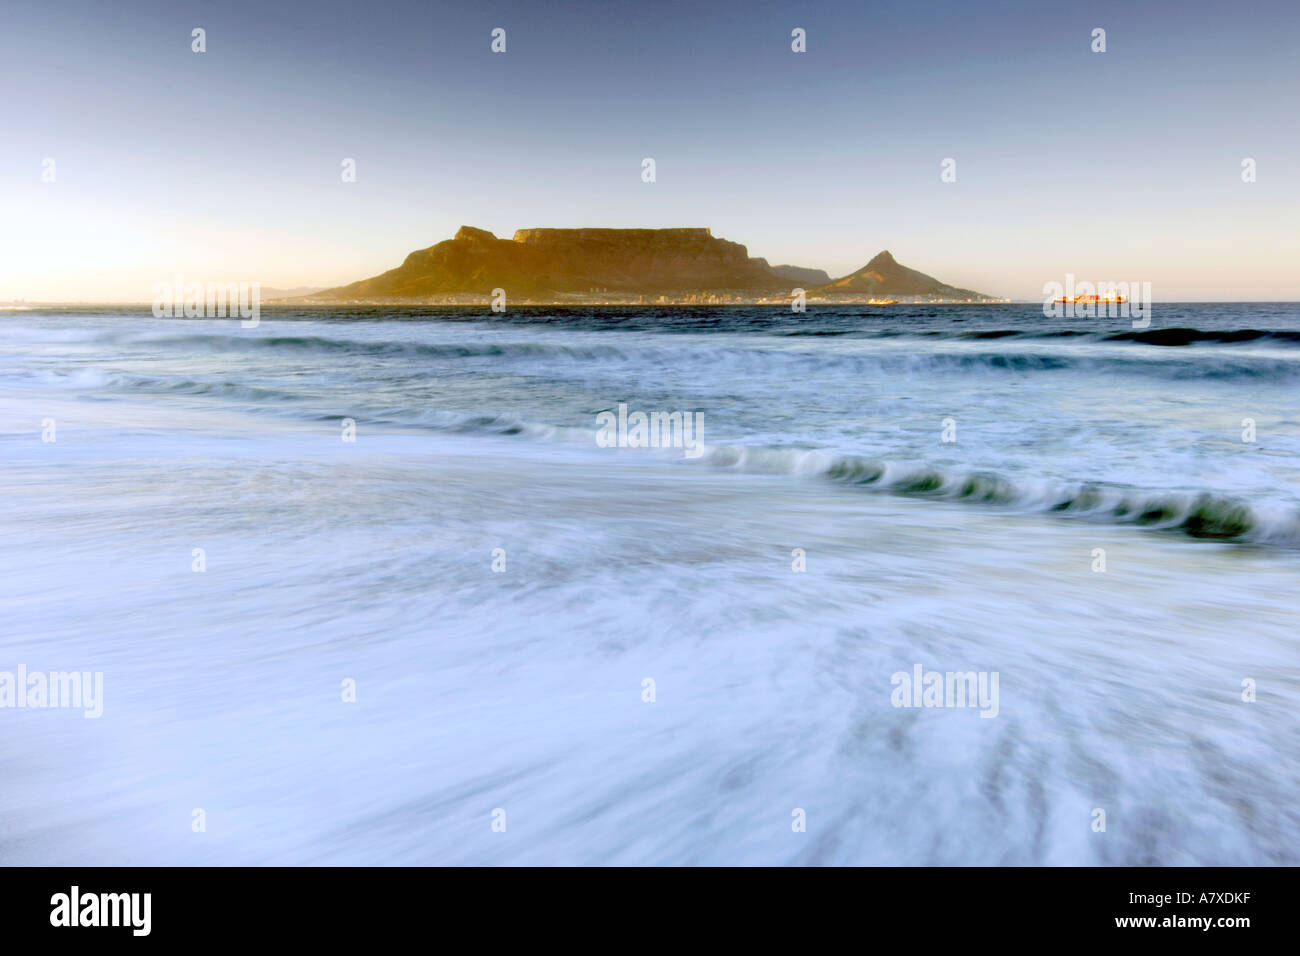 A dawn view of Table Mountain and the city of Cape Town seen across Table bay from Bloubergstrand beach. Stock Photo